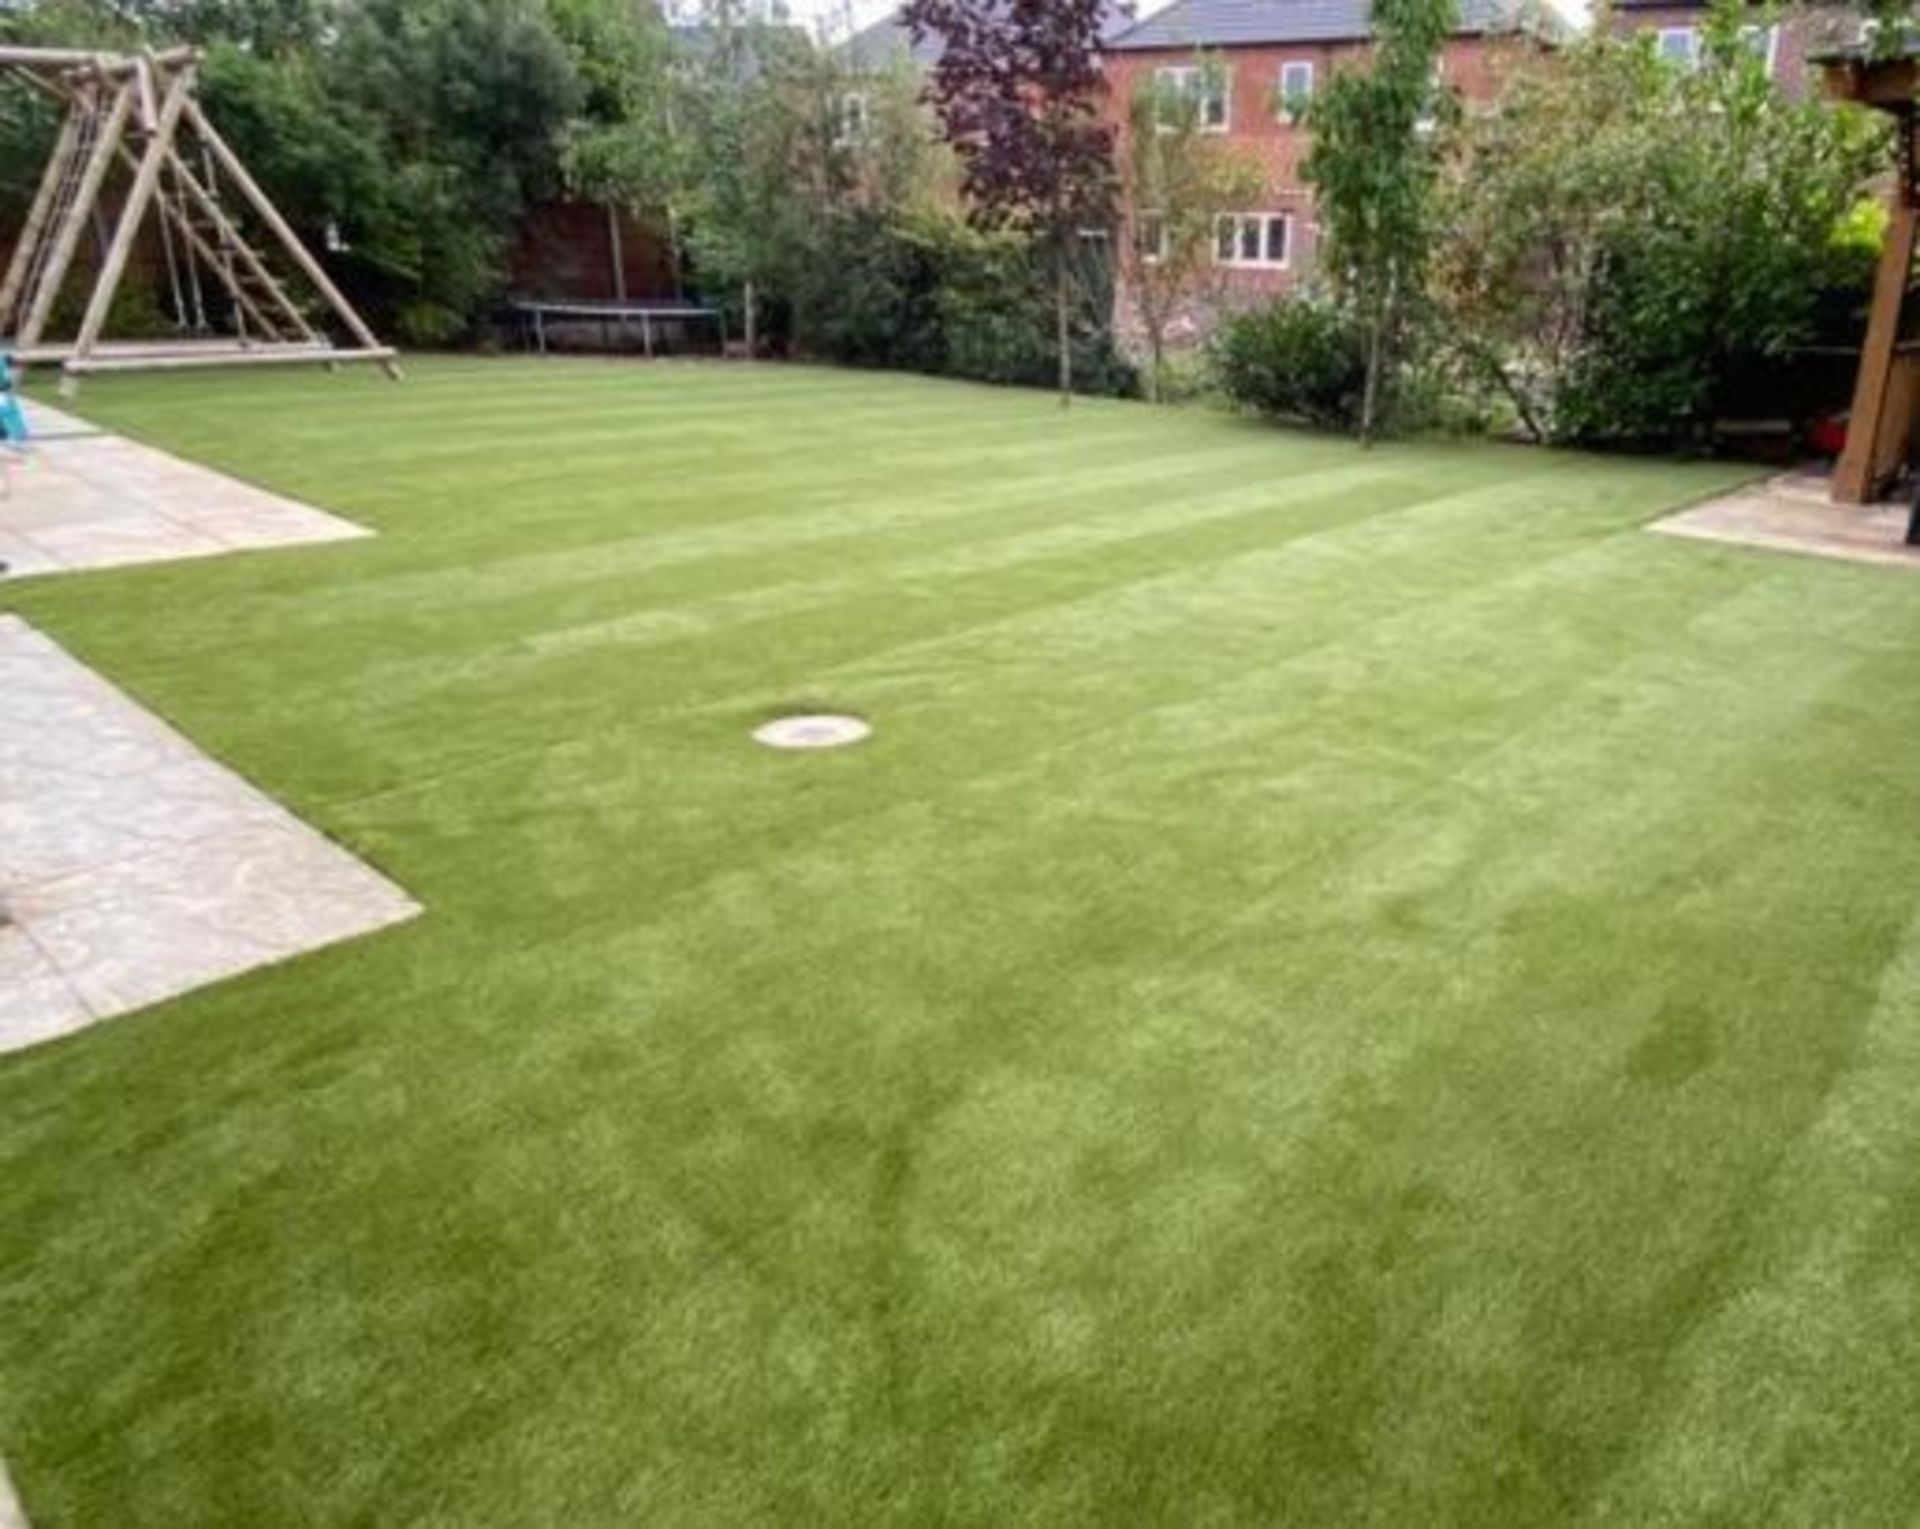 25x4m roll Playrite Nearly Grass Premium Artificial grass 35mm thick - Image 2 of 4